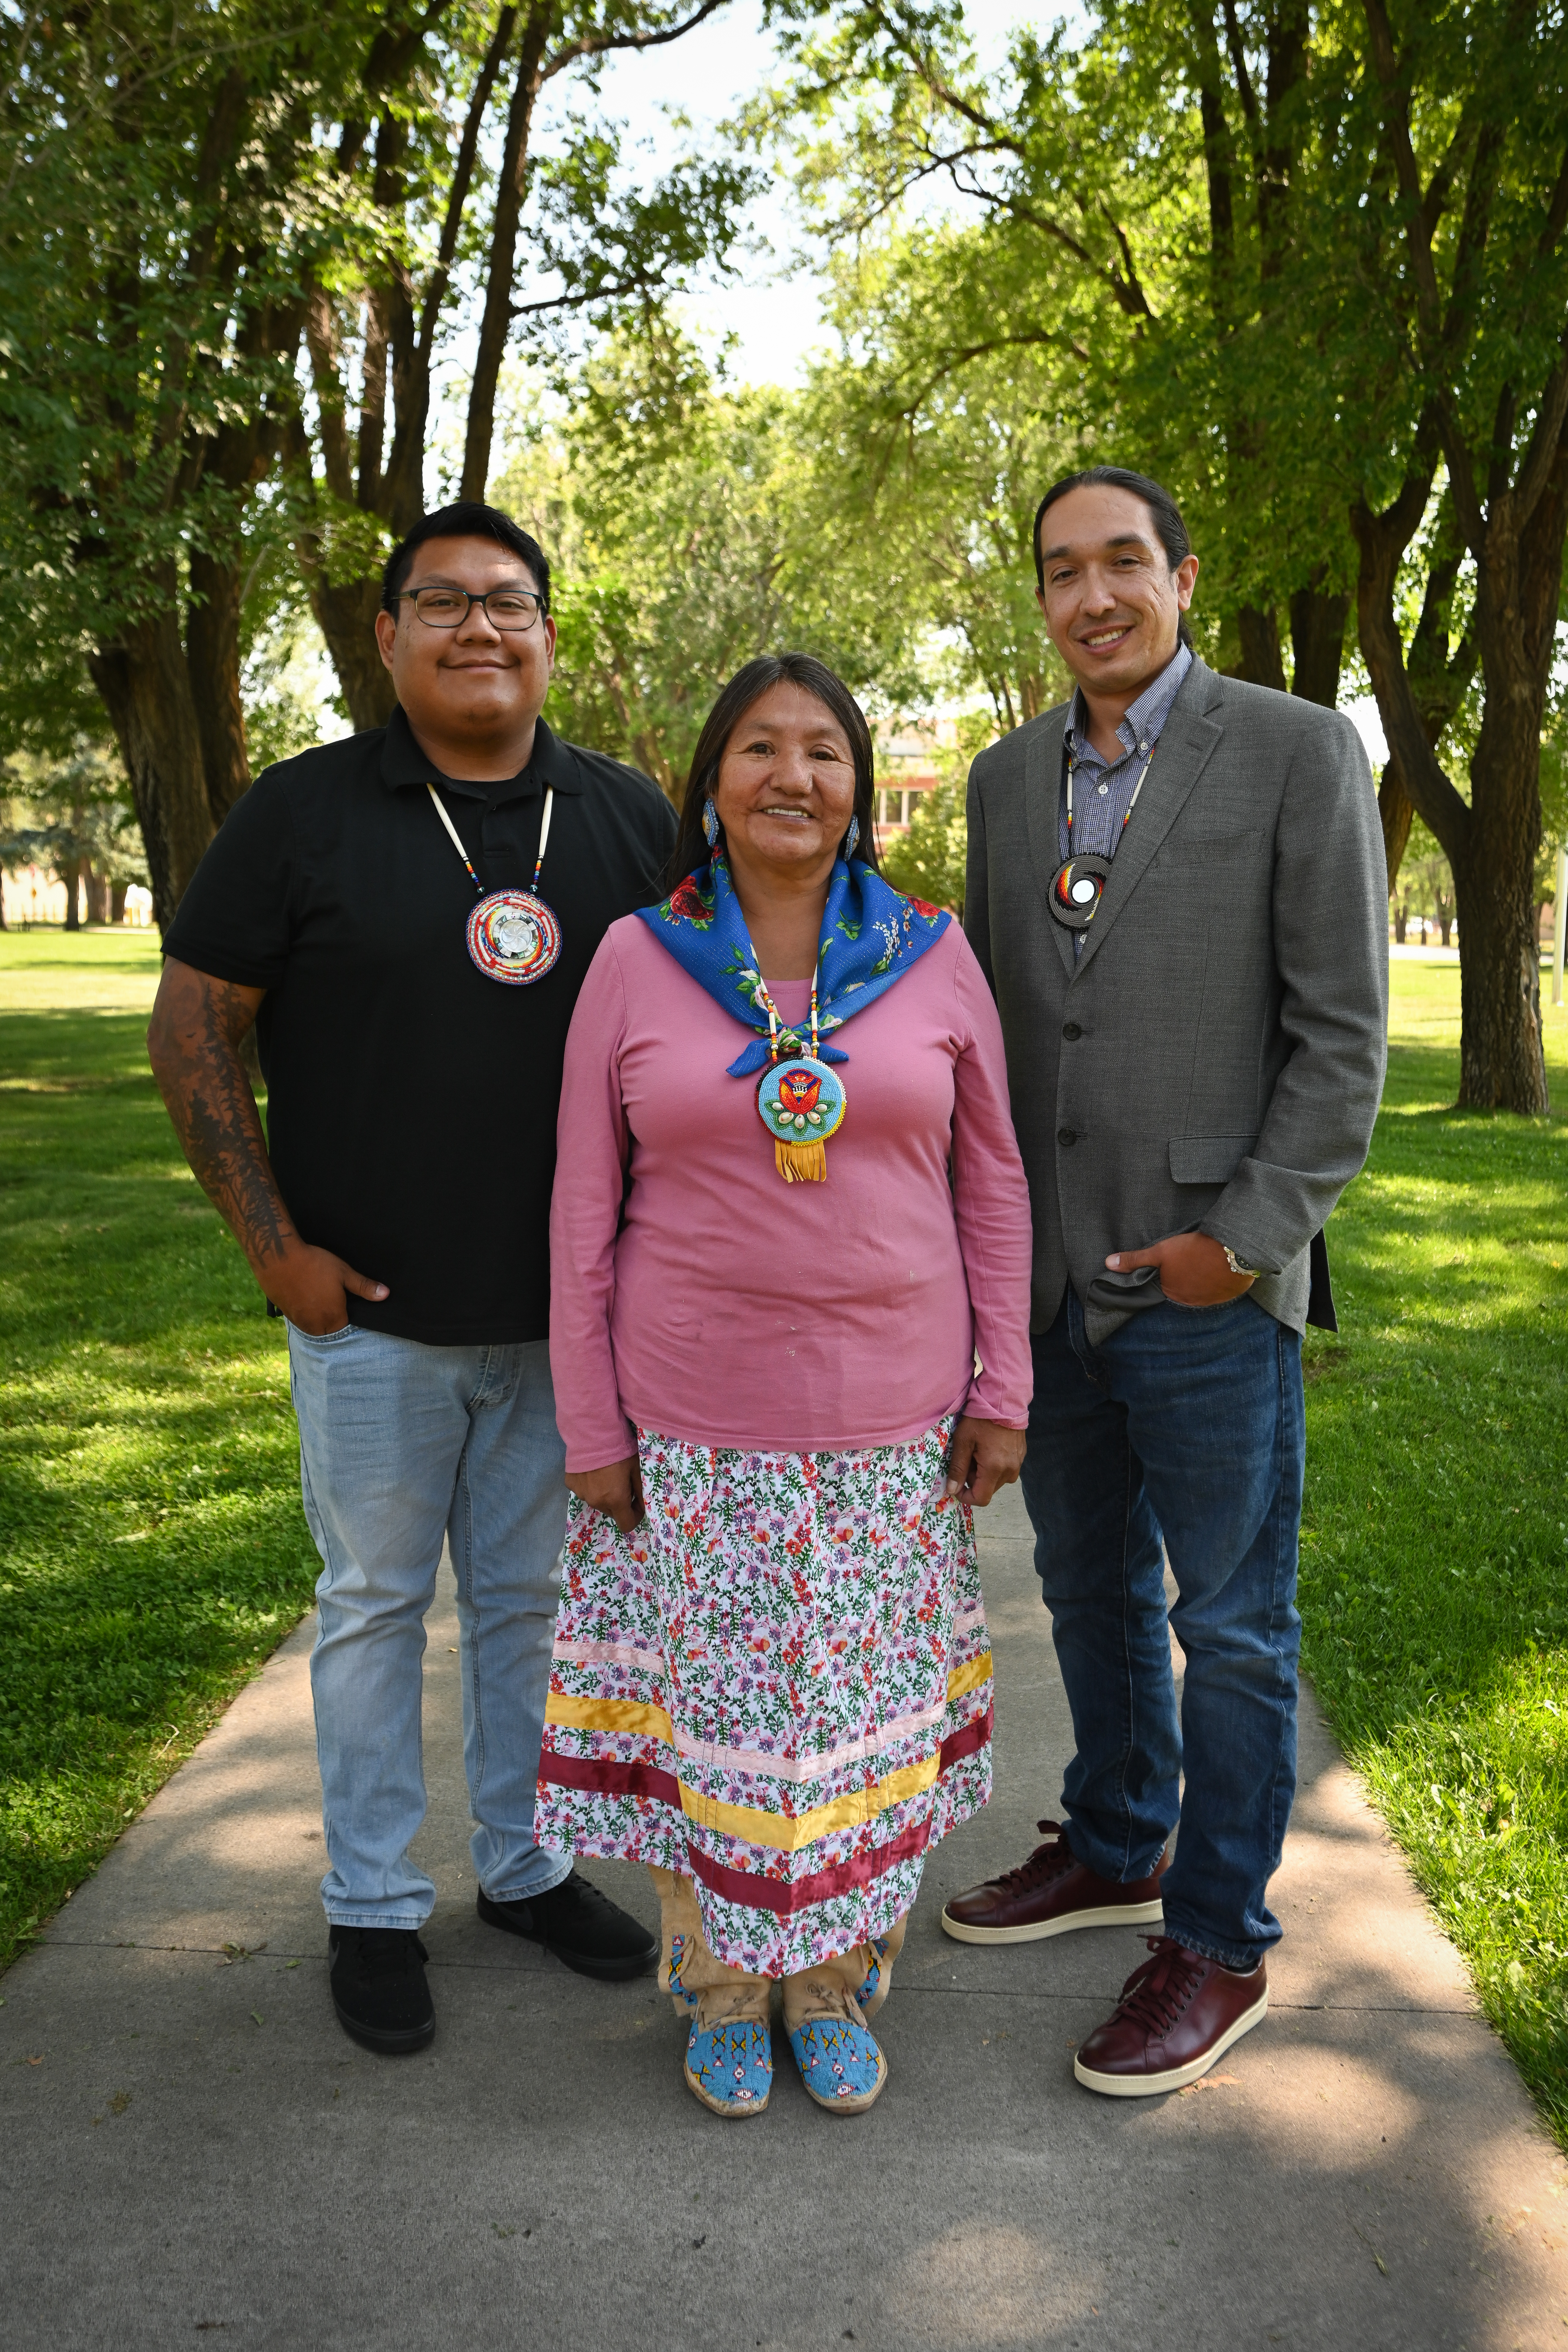 THPO Staff of the Southern Ute Indian Tribe.